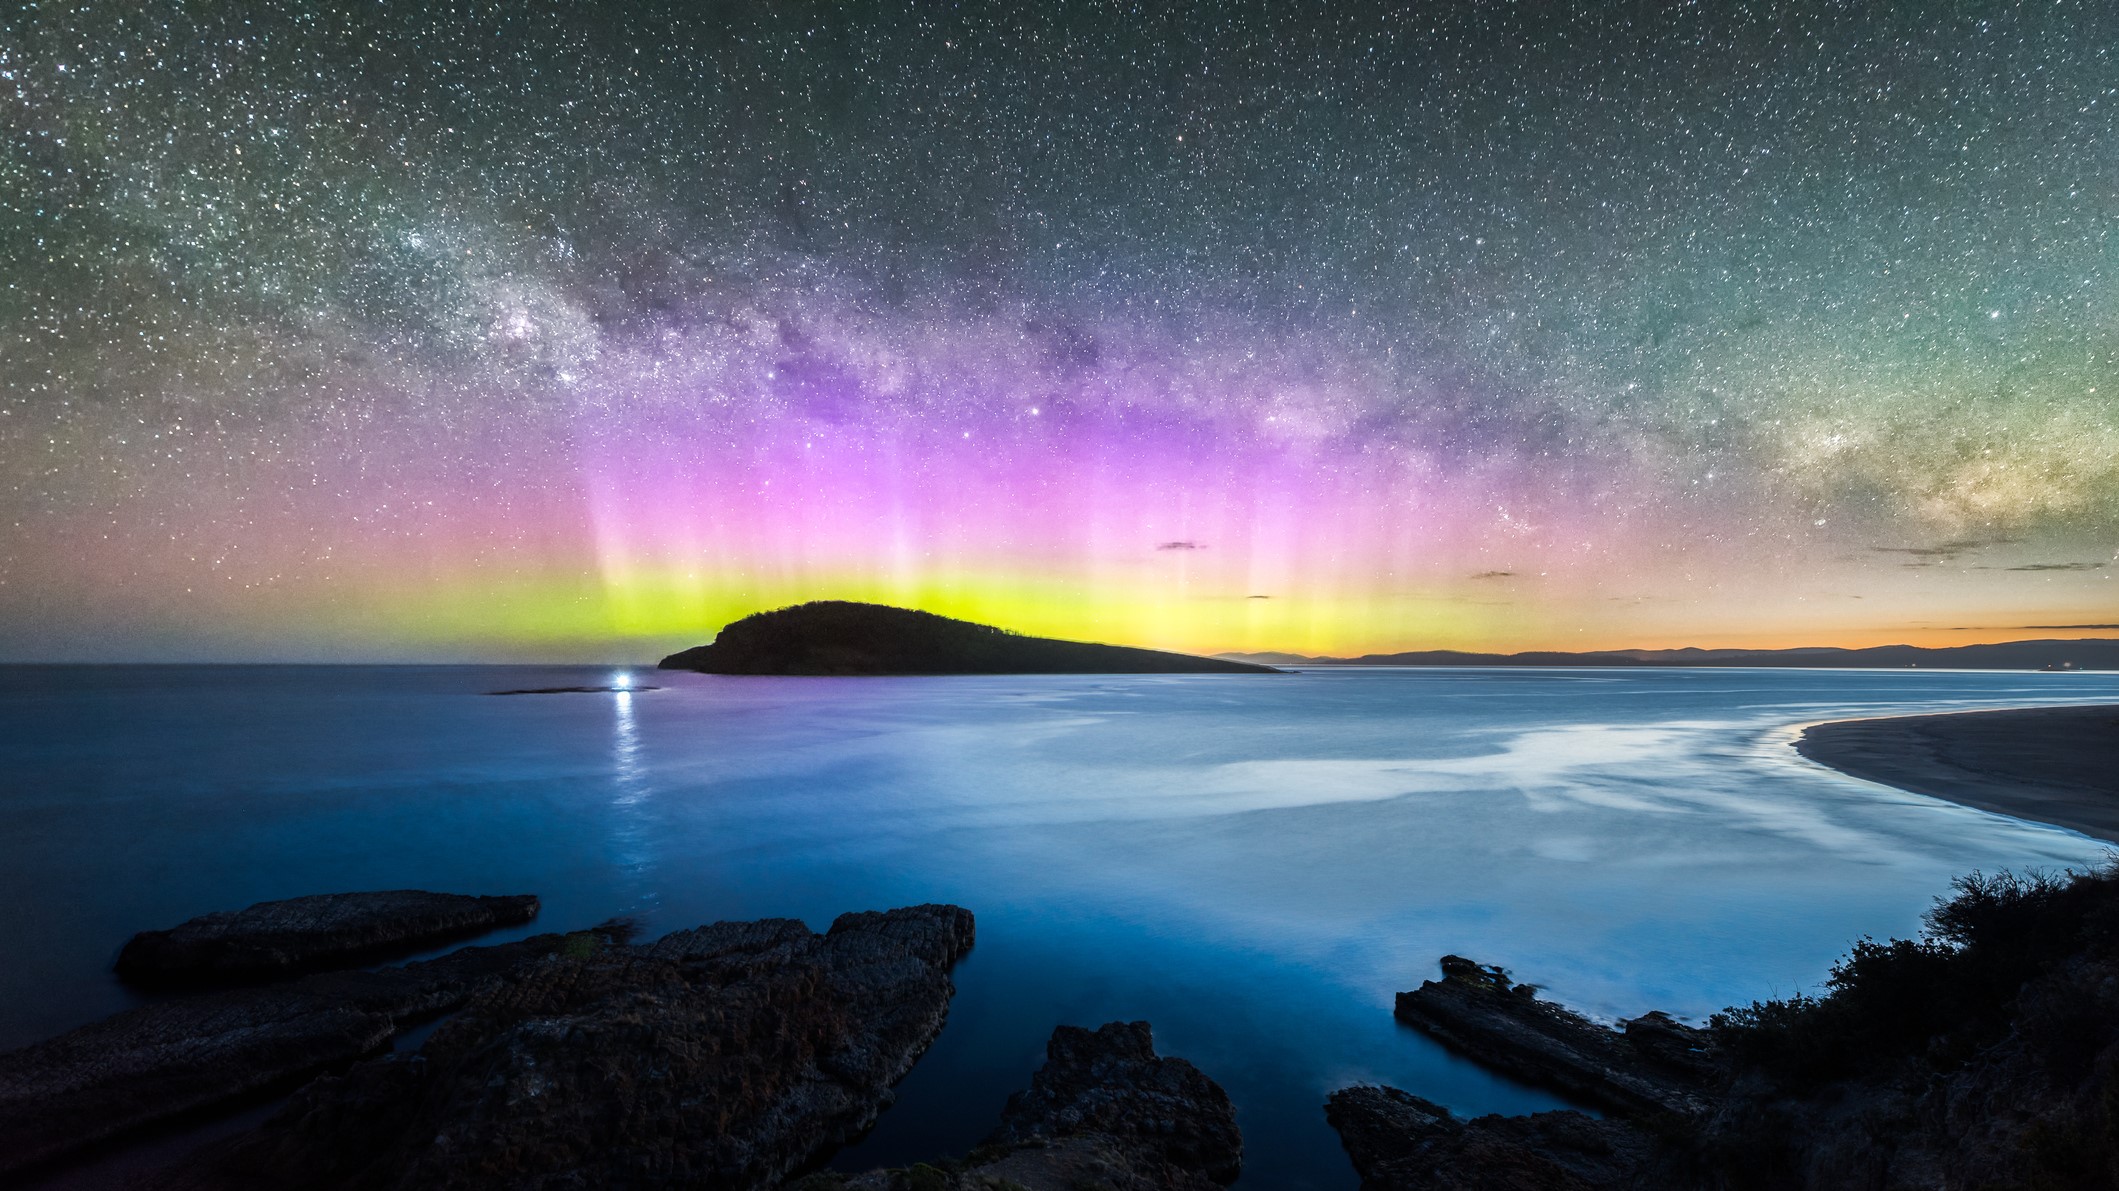 Aurora colors: What causes them and why do they vary? | Space